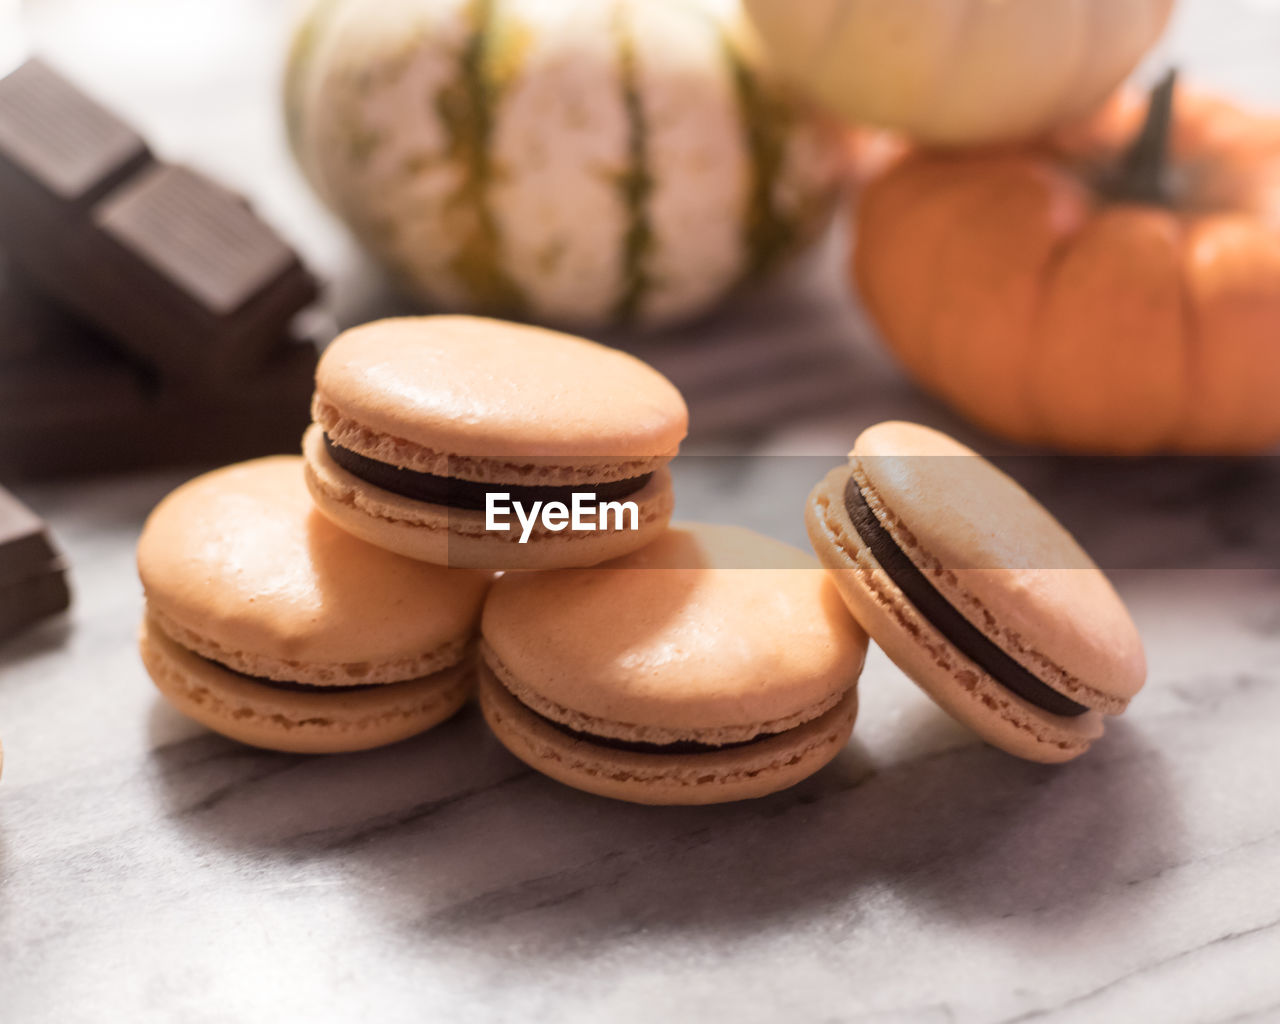 Pumpkin chocolate macarons with chocolate pieces and mini gourds